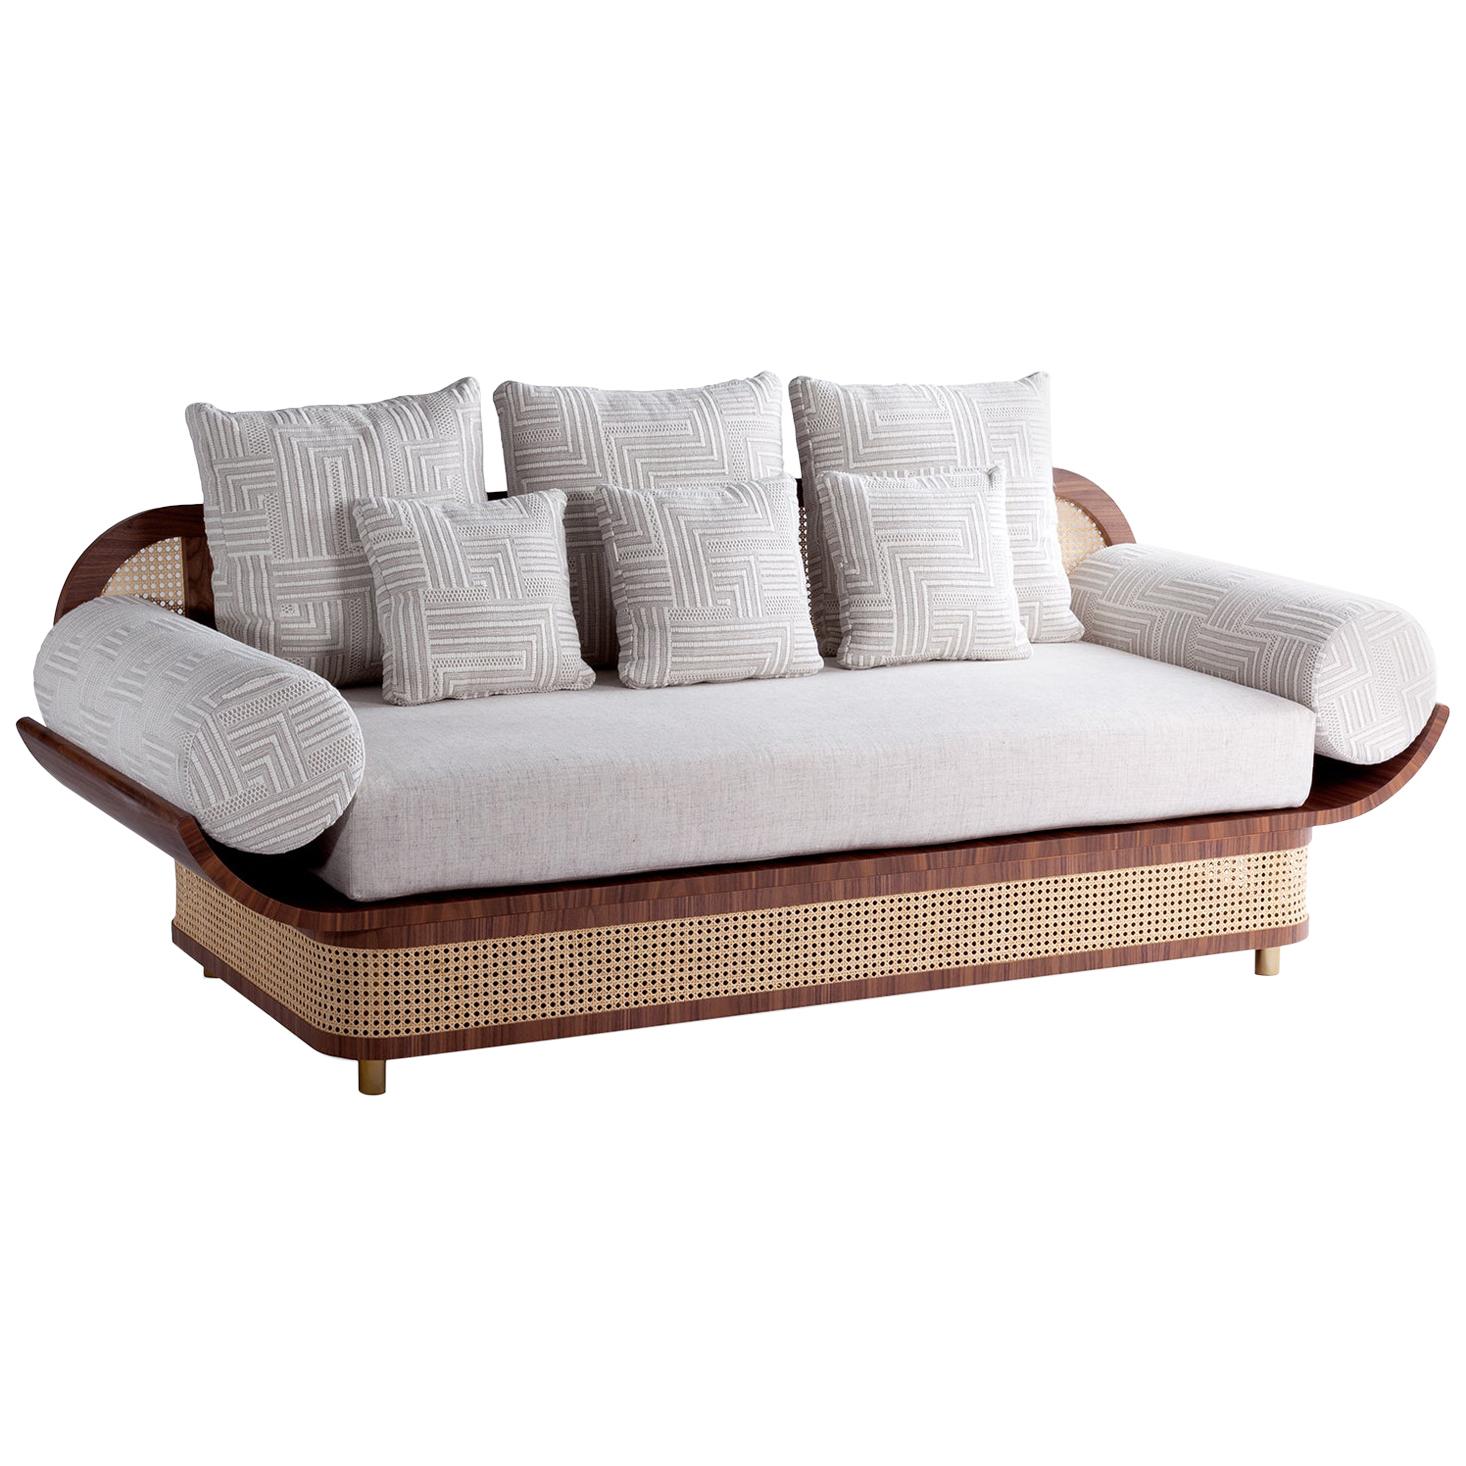 DOOQ Sofa Settee with Textured Fabric, Natural Walnut and Brass Details Majestic For Sale